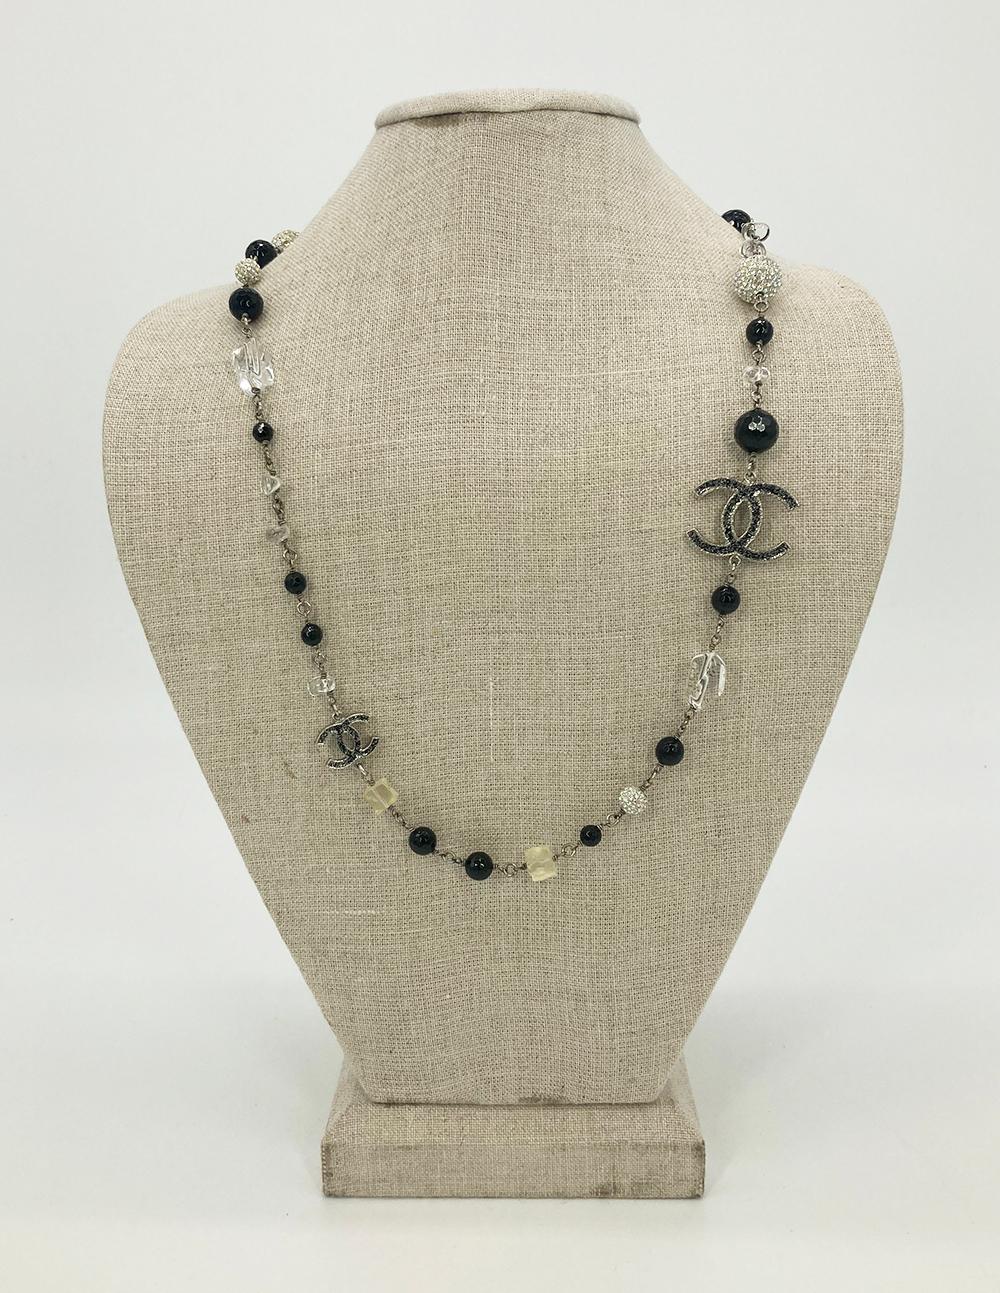 Chanel Pearl Crystal Beaded Necklace in excellent condition. Black pearls, clear crystal squares, clear crystal free form beads, round rhinestone embedded beads, and silver CC logos embossed with black glitter all strung together with silver